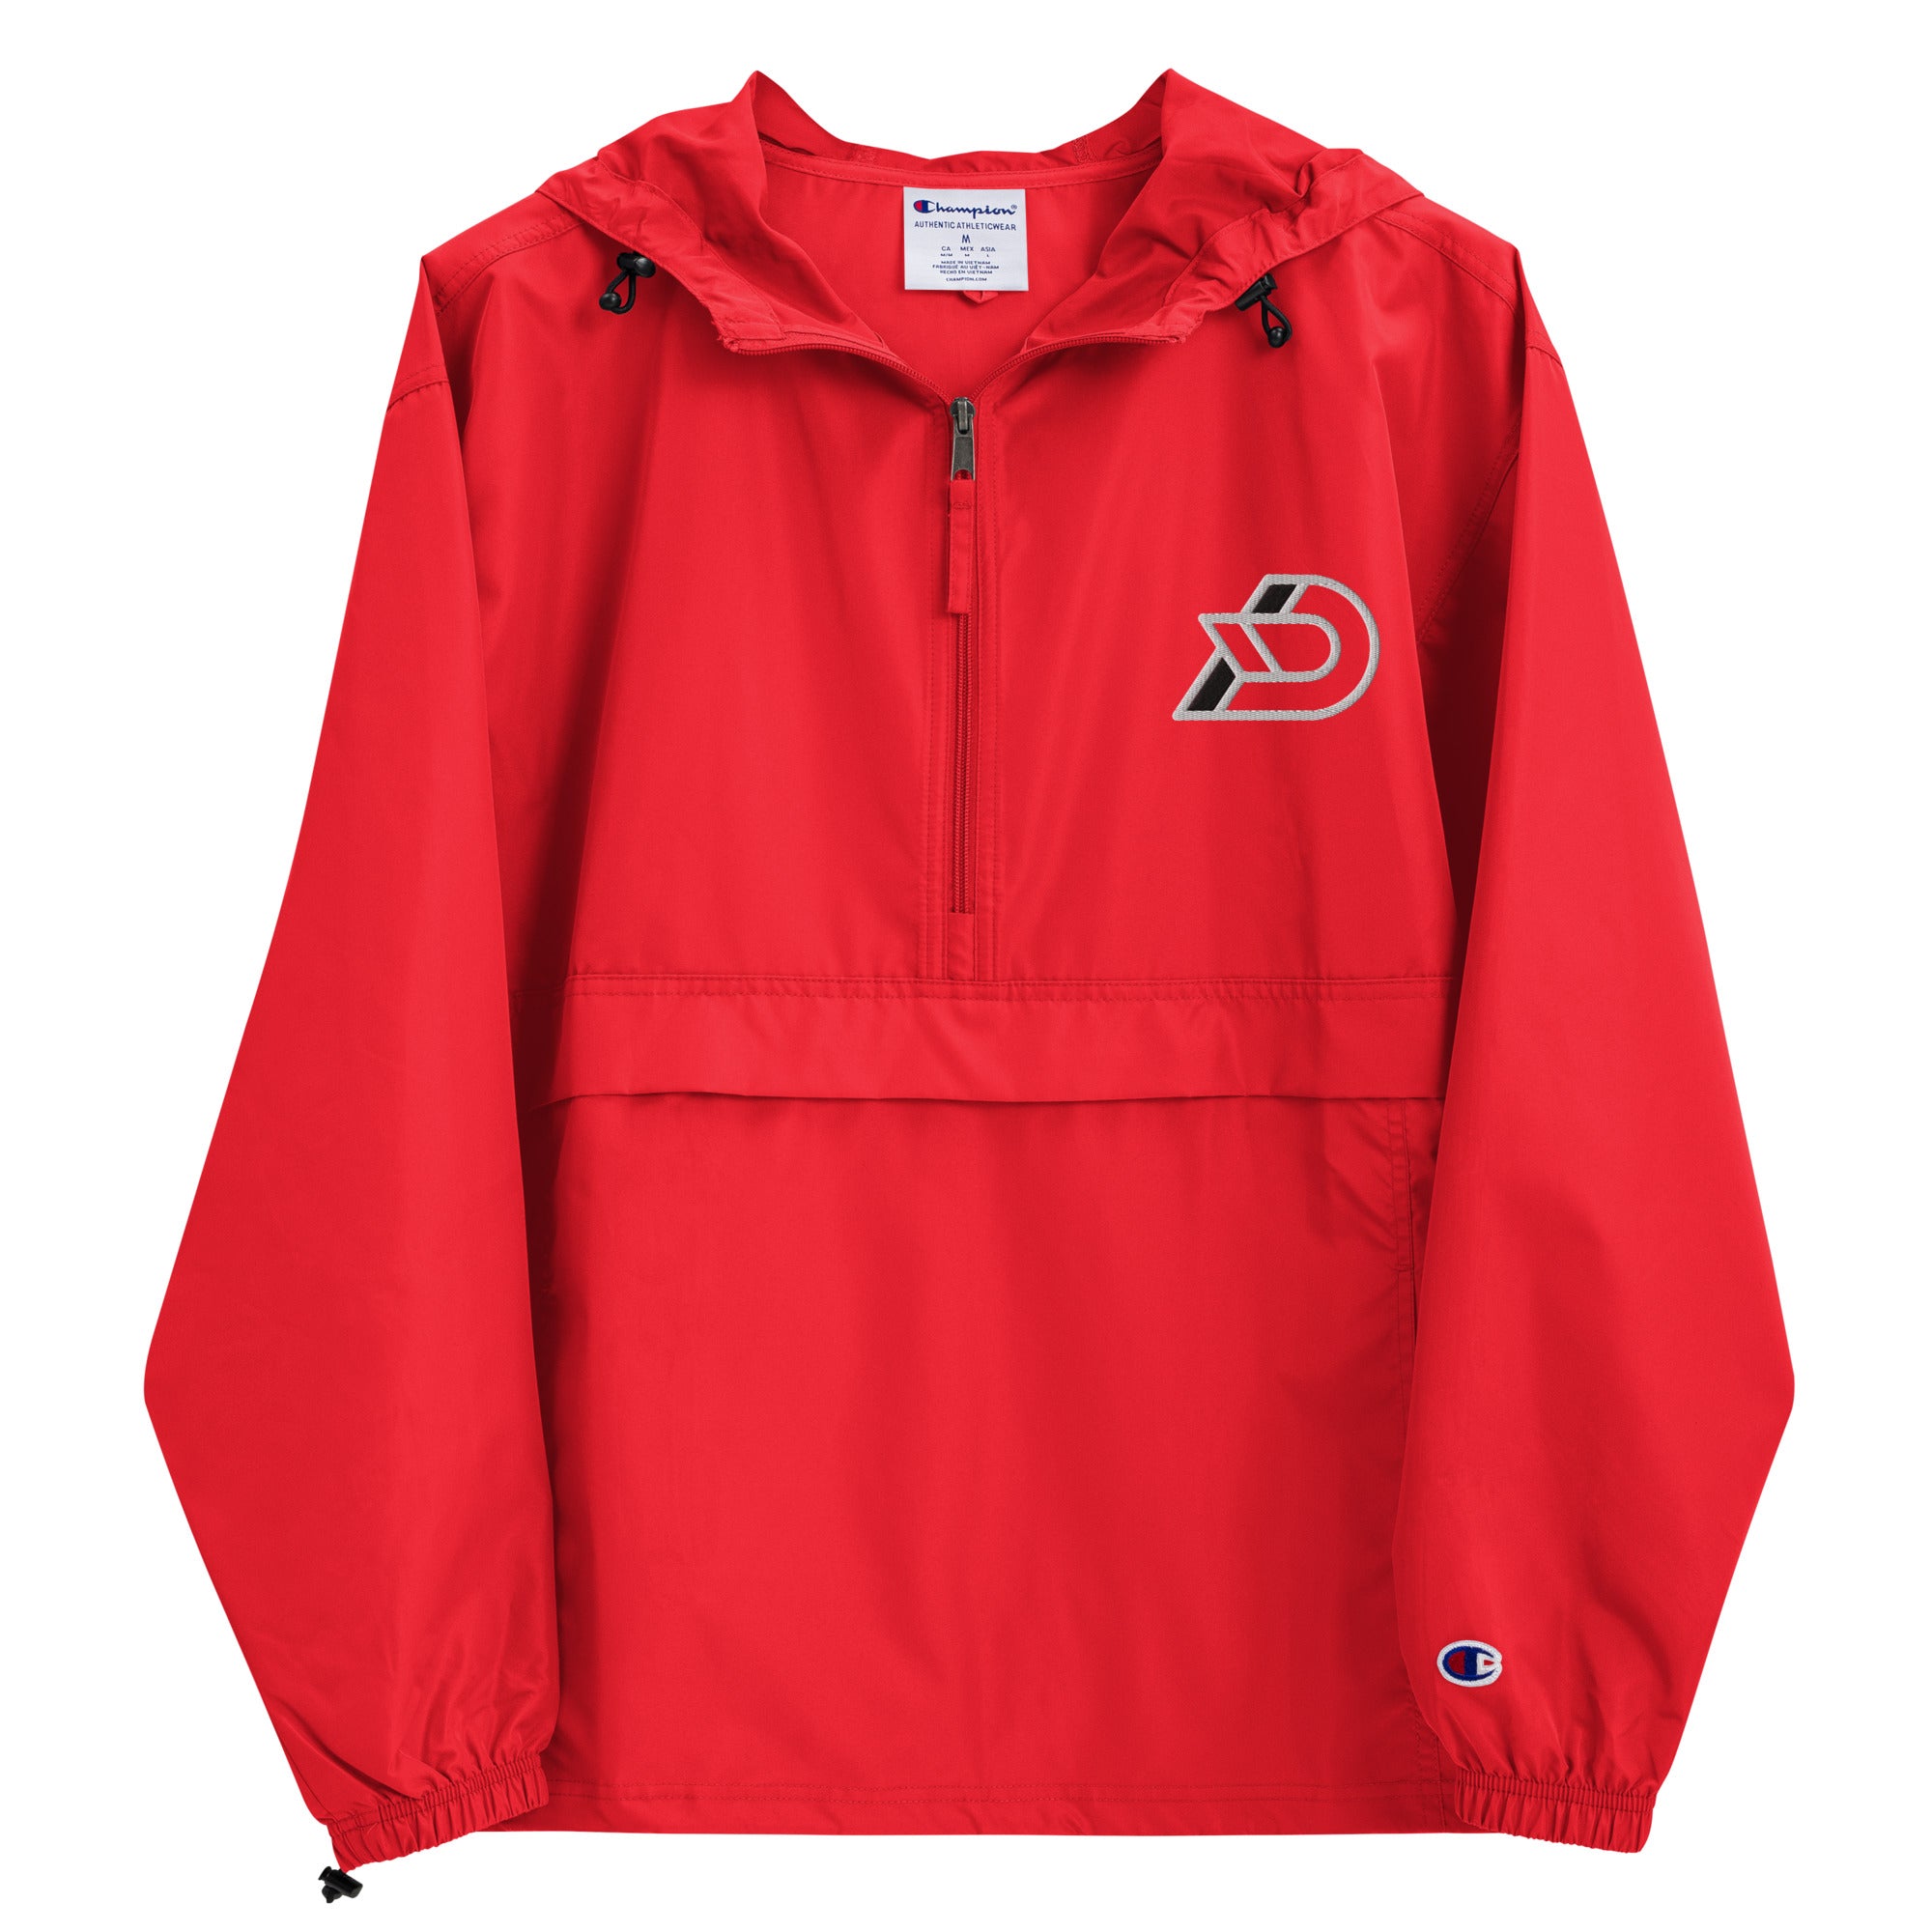 $DRIVE RACE TEAM - Champion Packable Jacket (Red)